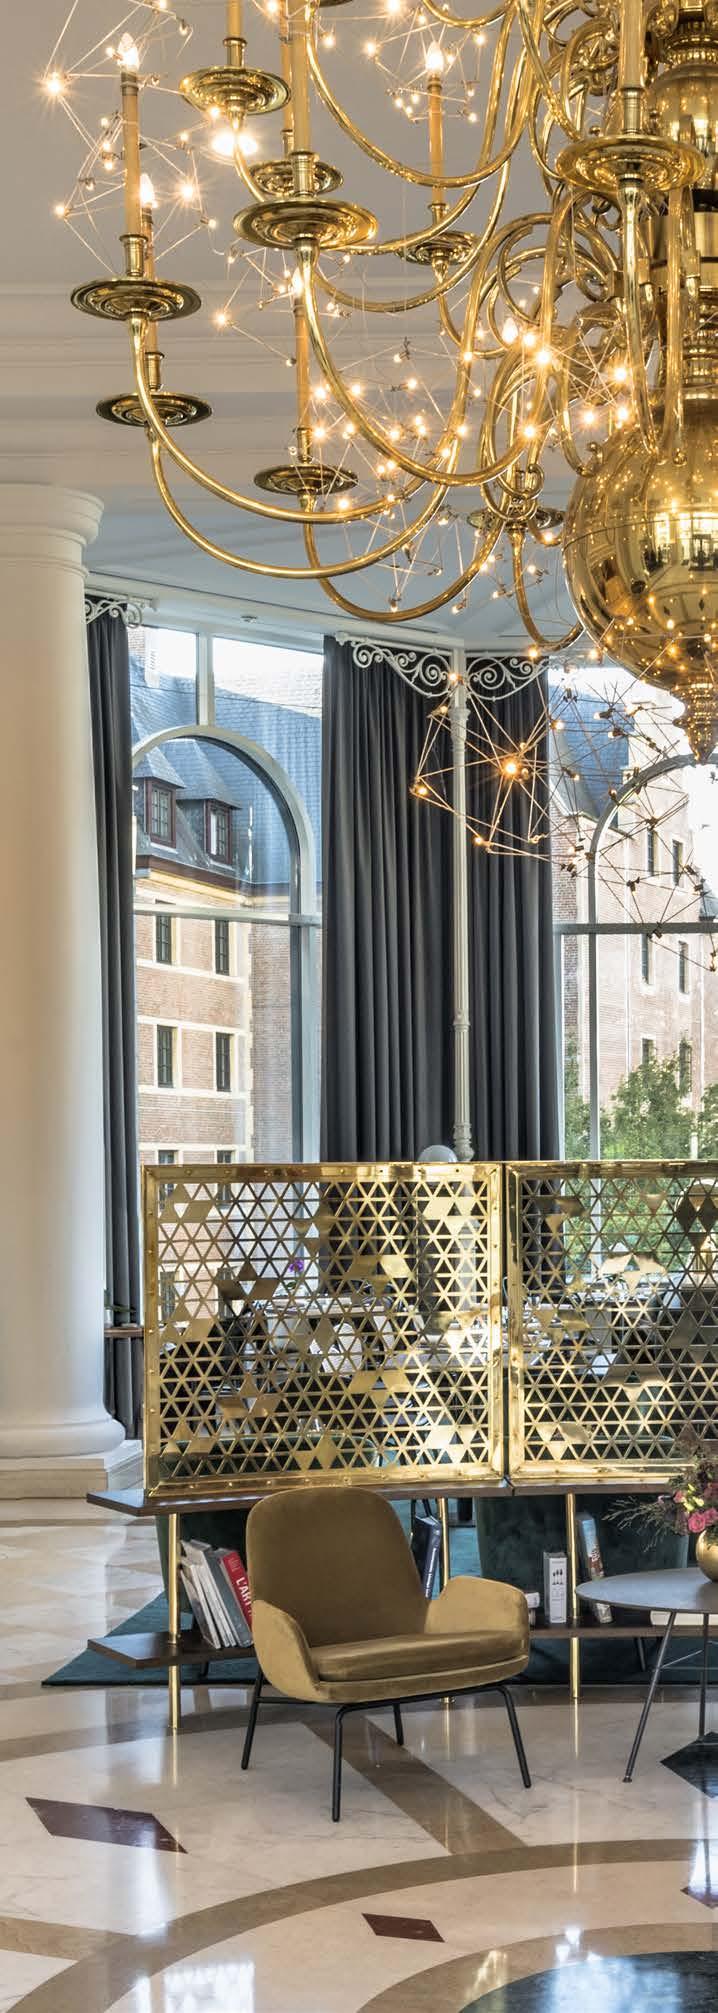 TRIGGER Your senses Hilton Brussels Grand Place unveils a brand new restaurant: The festive season is the ideal timing to let you triggering your senses with this new culinary experience in an